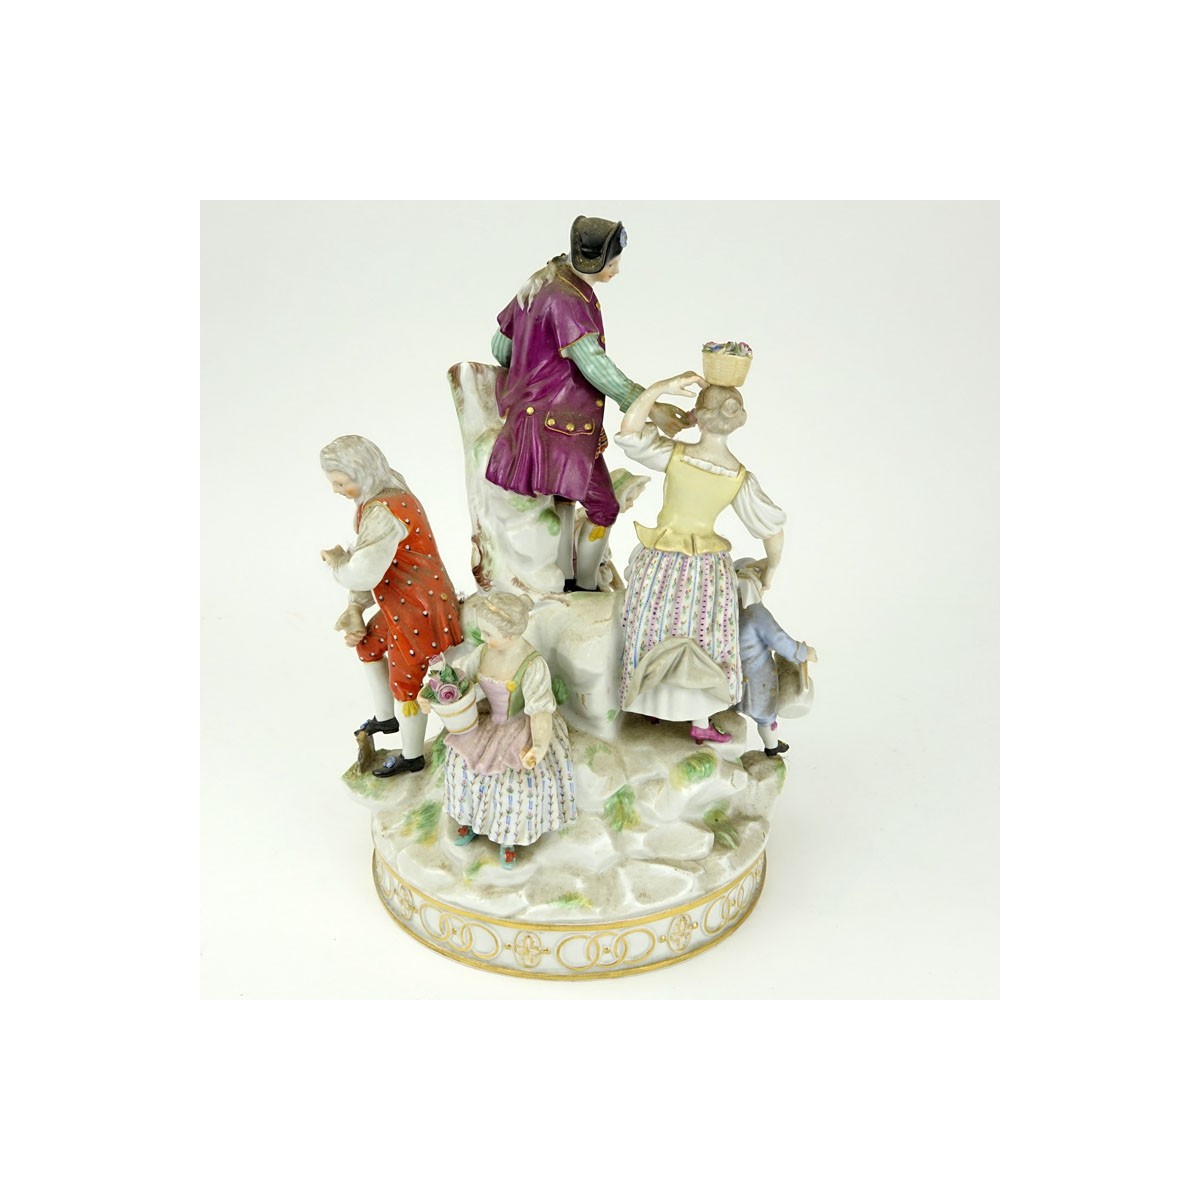 19th Century Meissen Hand Painted Porcelain Figural Group. Blue crossed sword mark to base.